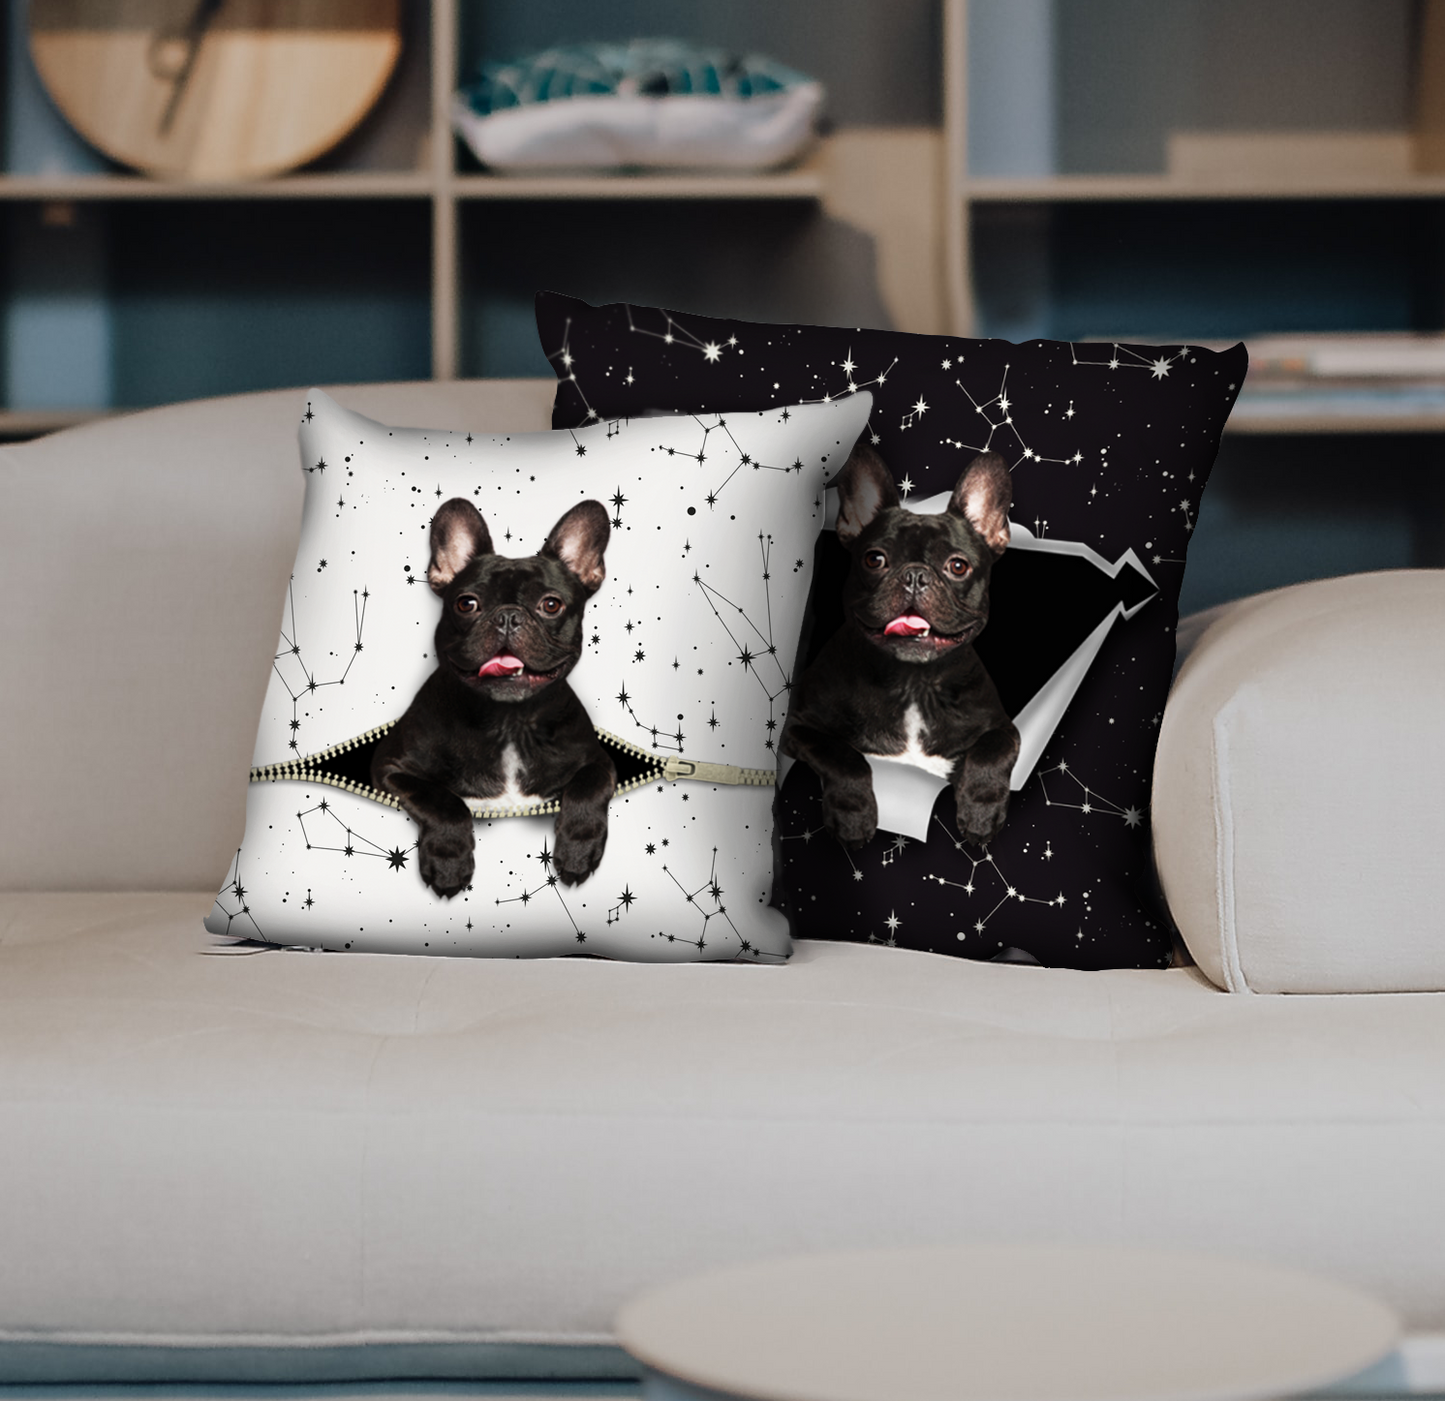 They Steal Your Couch - French Bulldog Pillow Cases V4 (Set of 2)